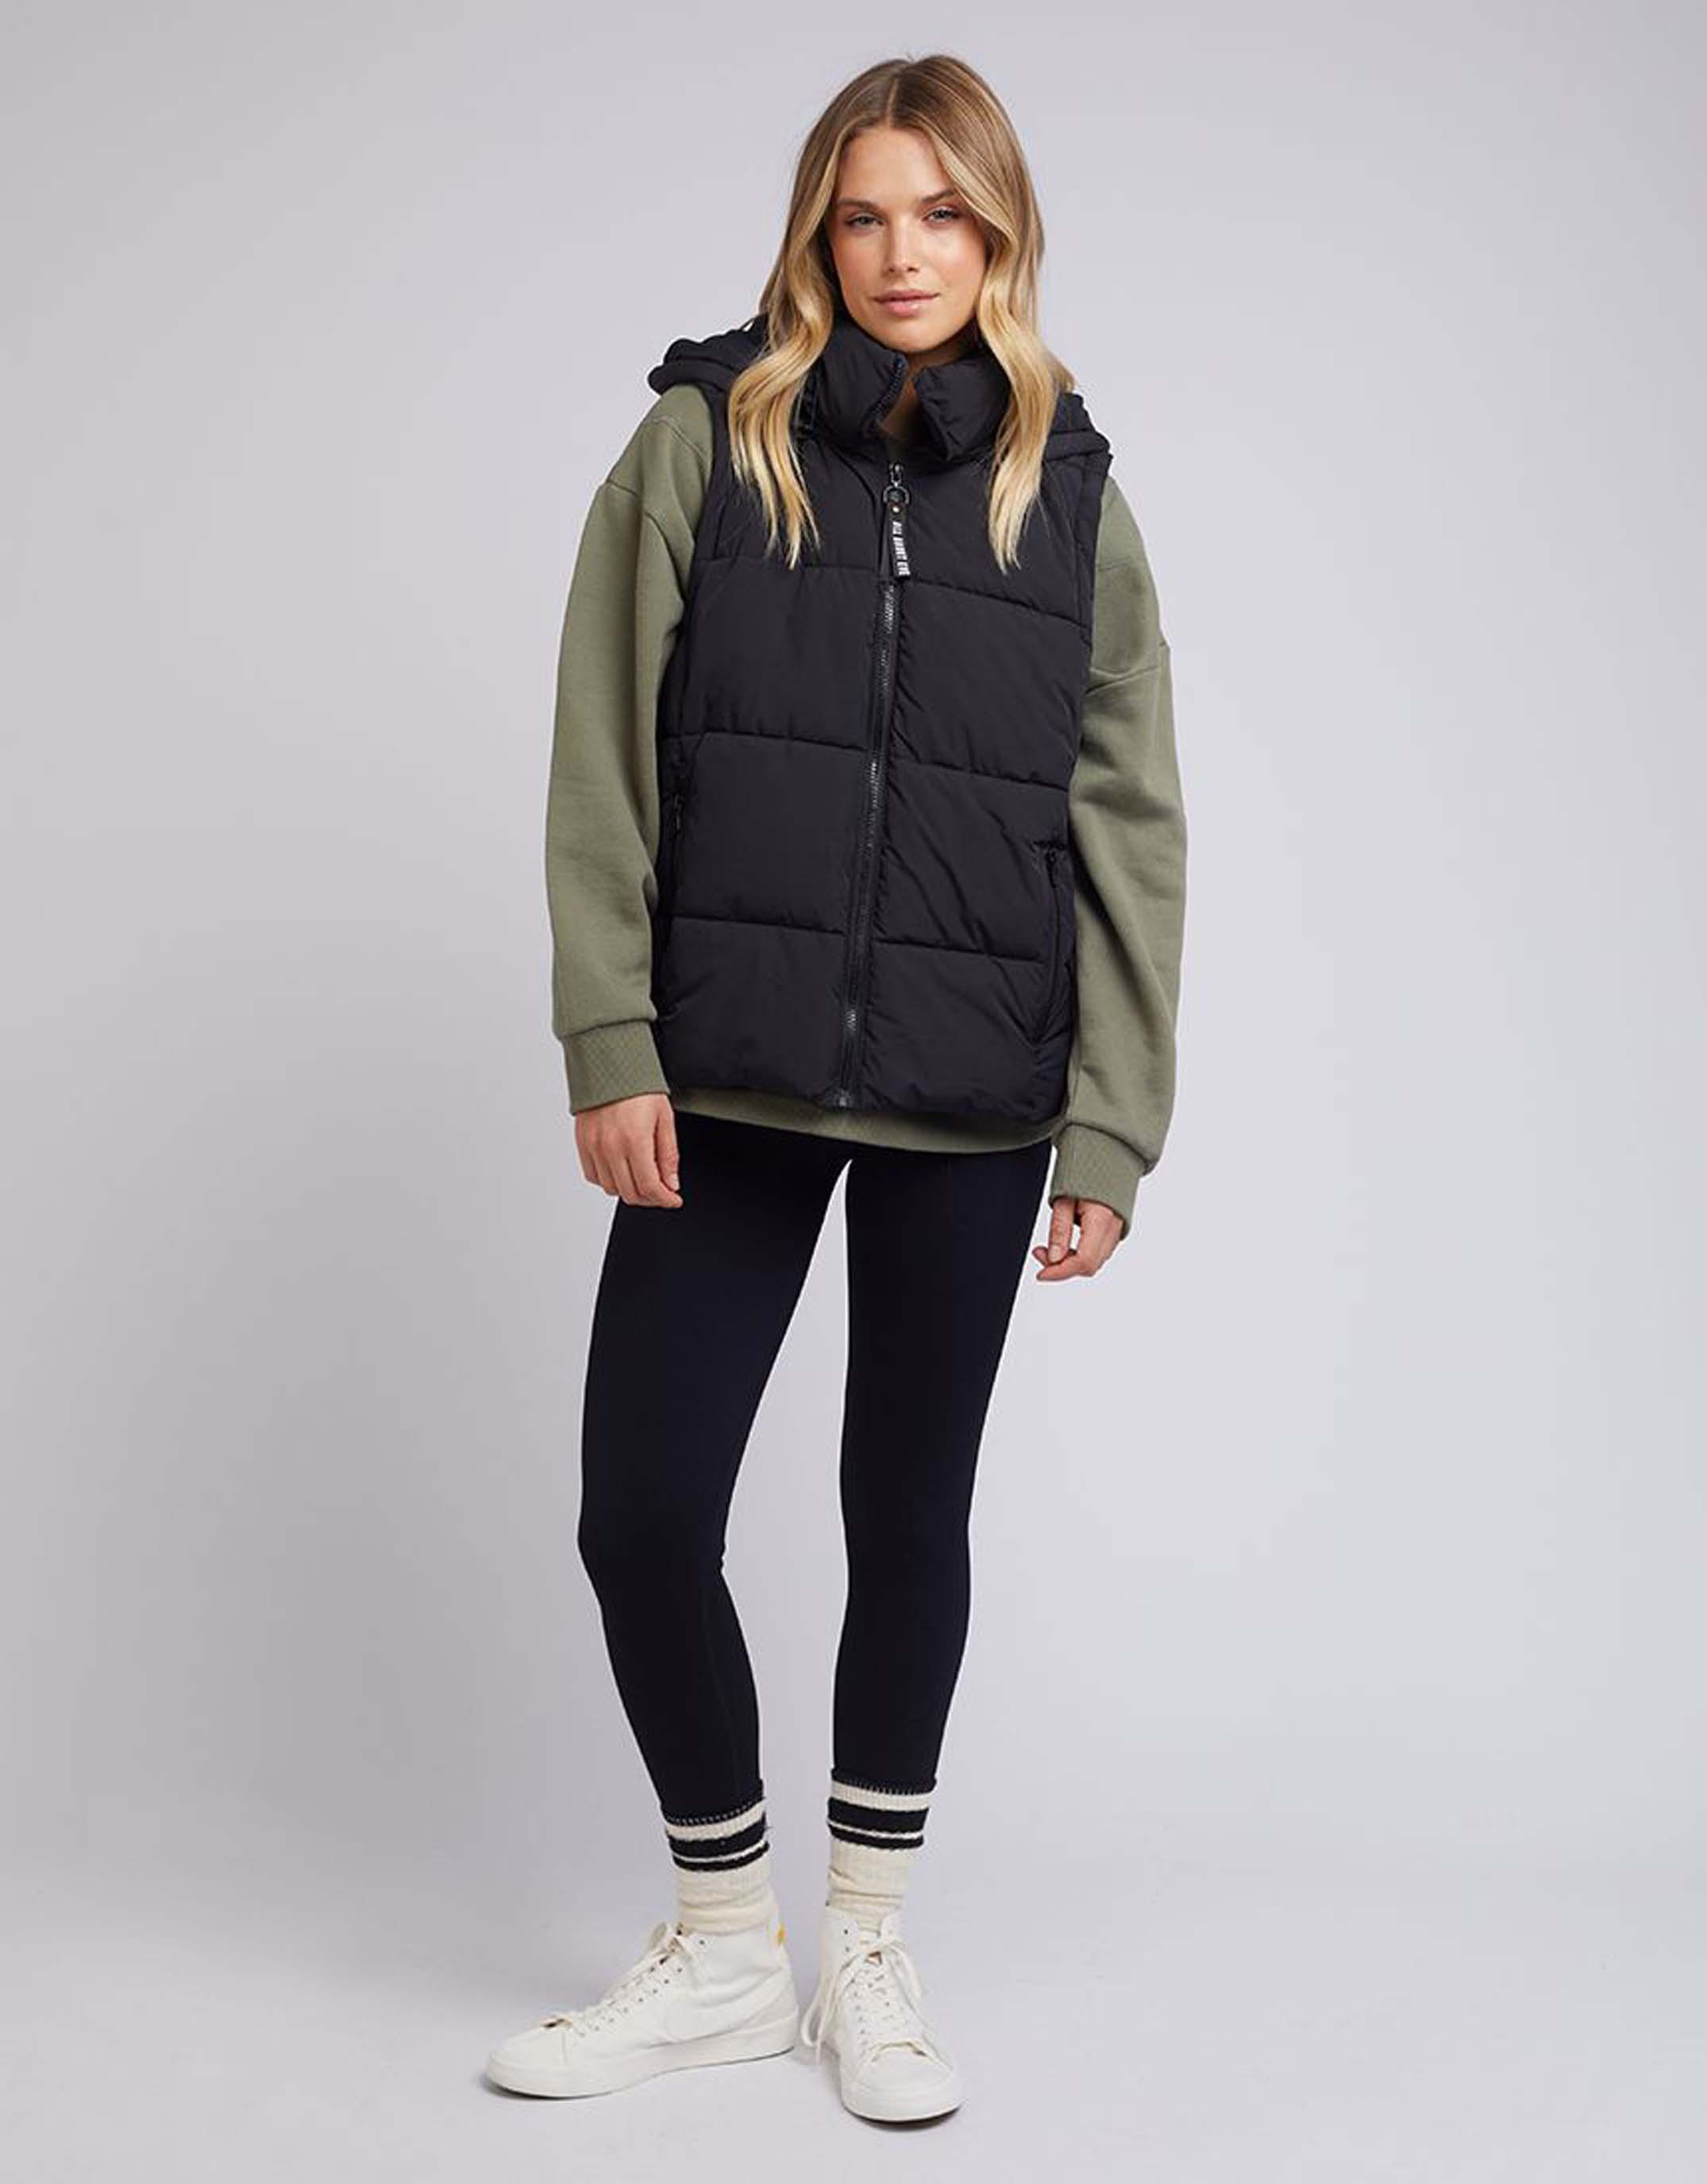 All About Eve - Remi Luxe Puffer Vest - Black - White & Co Living Jackets